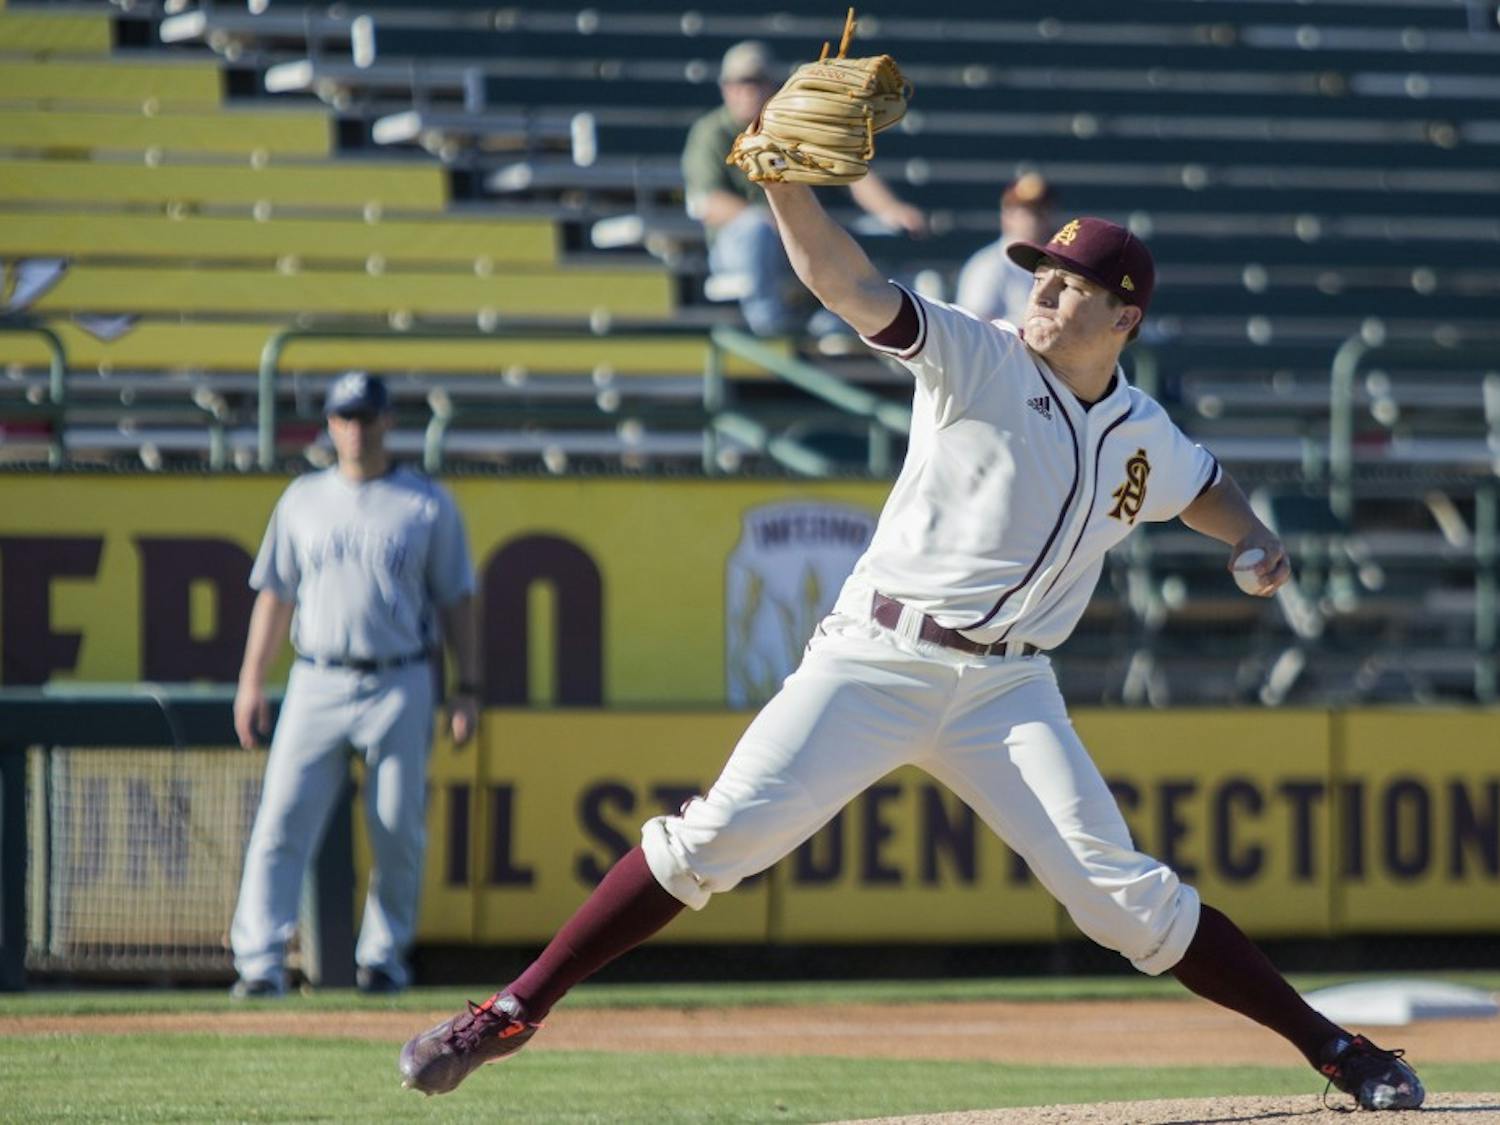 Sophomore pitcher Eli Lingos pitches during the second of two games against Xavier at Phoenix Municipal Stadium on Saturday, Feb. 20, 2016. The Sun Devils won the matchup, 8-2.  